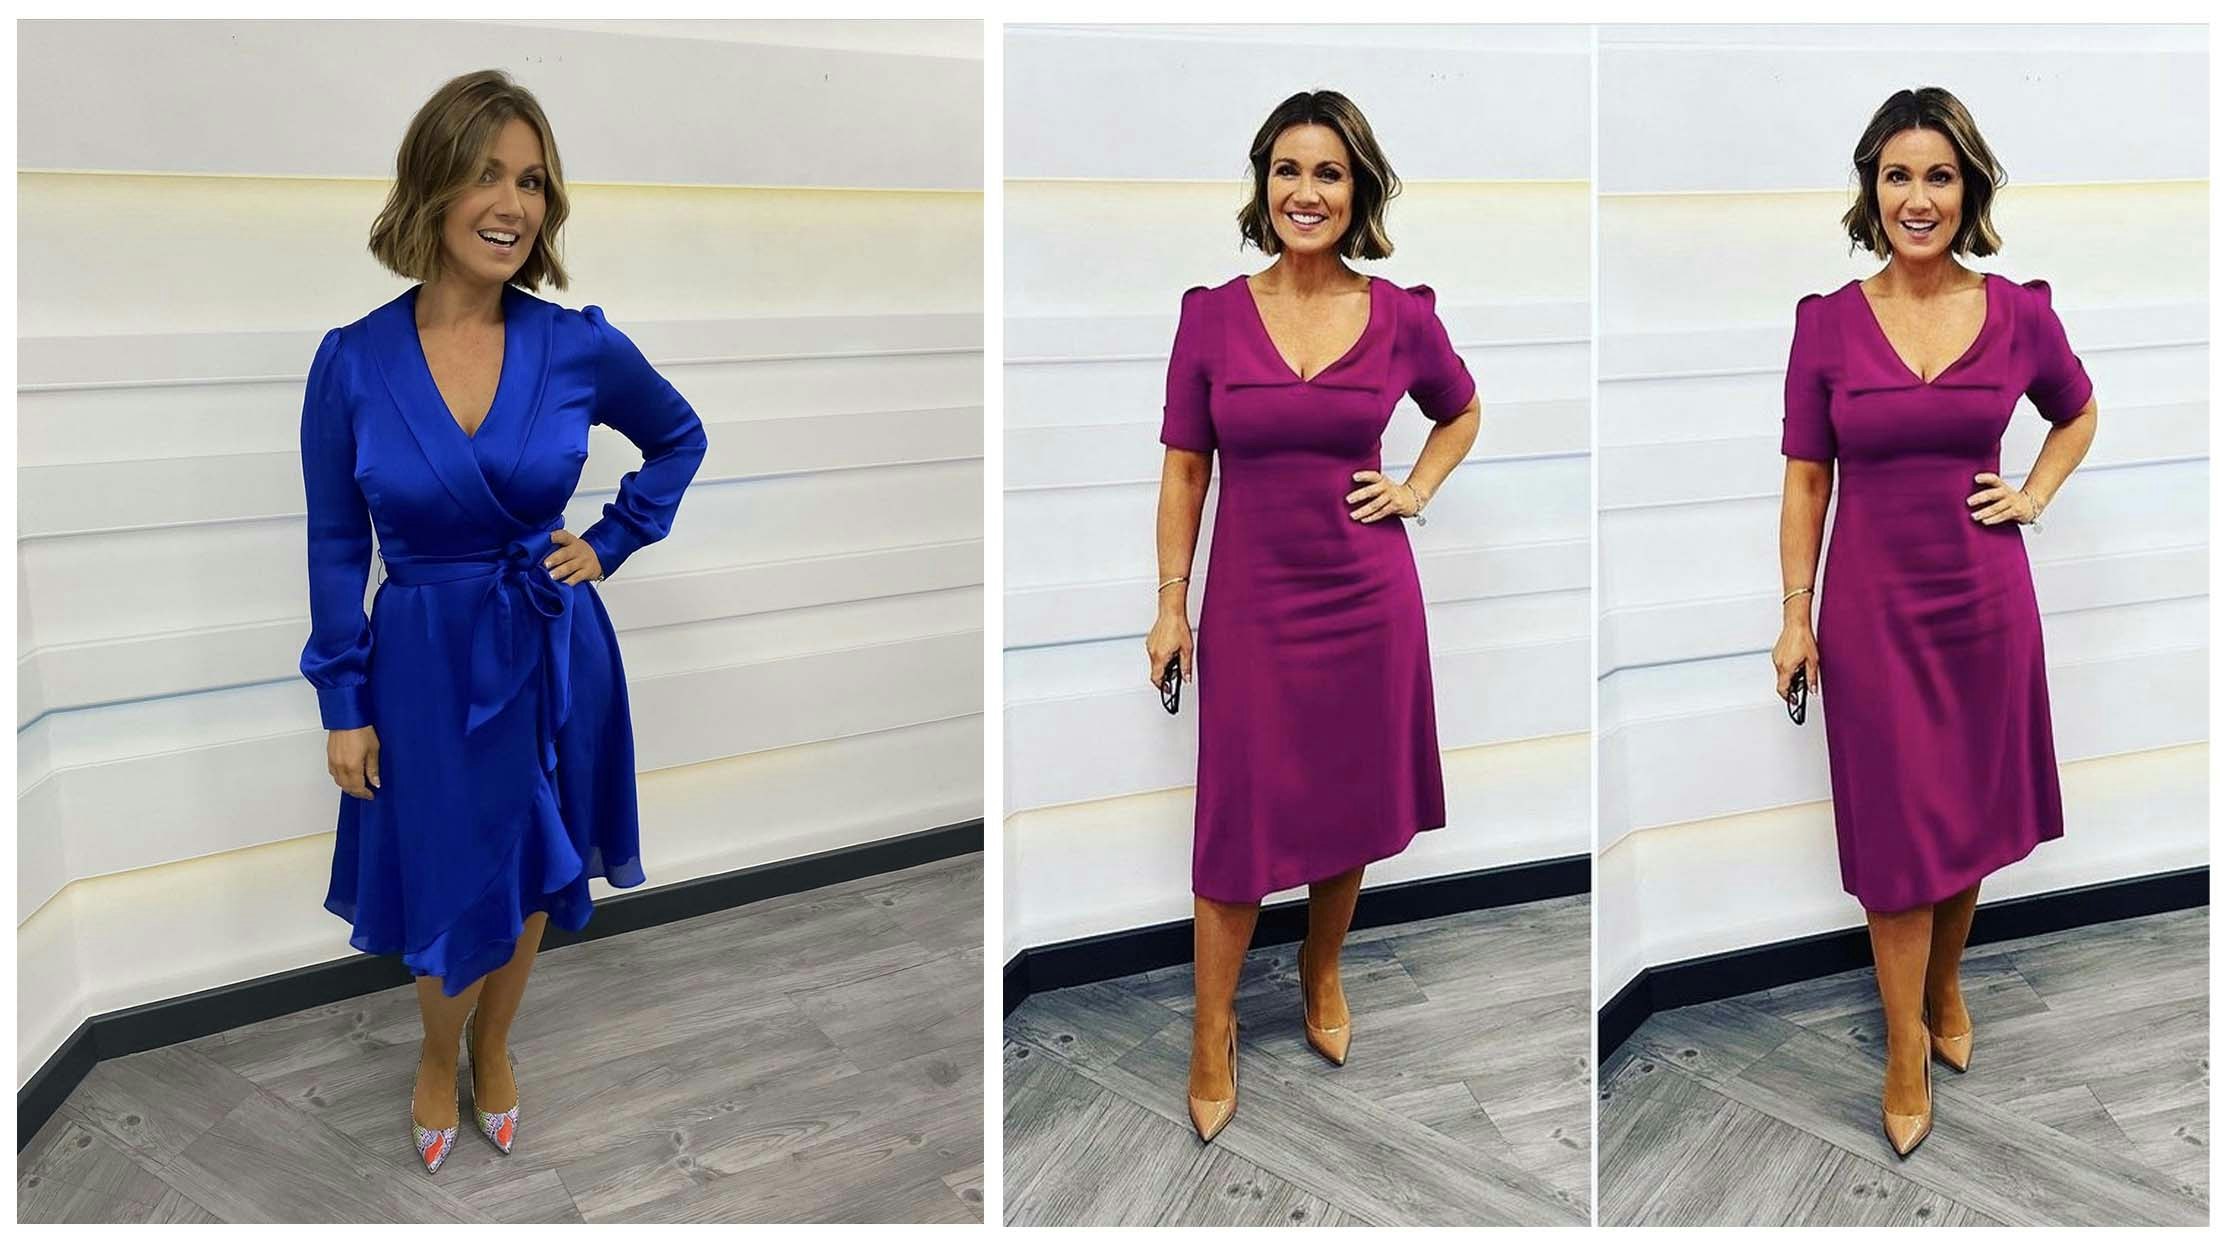 Susanna Reid’s outfits from Good Morning Britain – and where to buy them cheaper on the high street